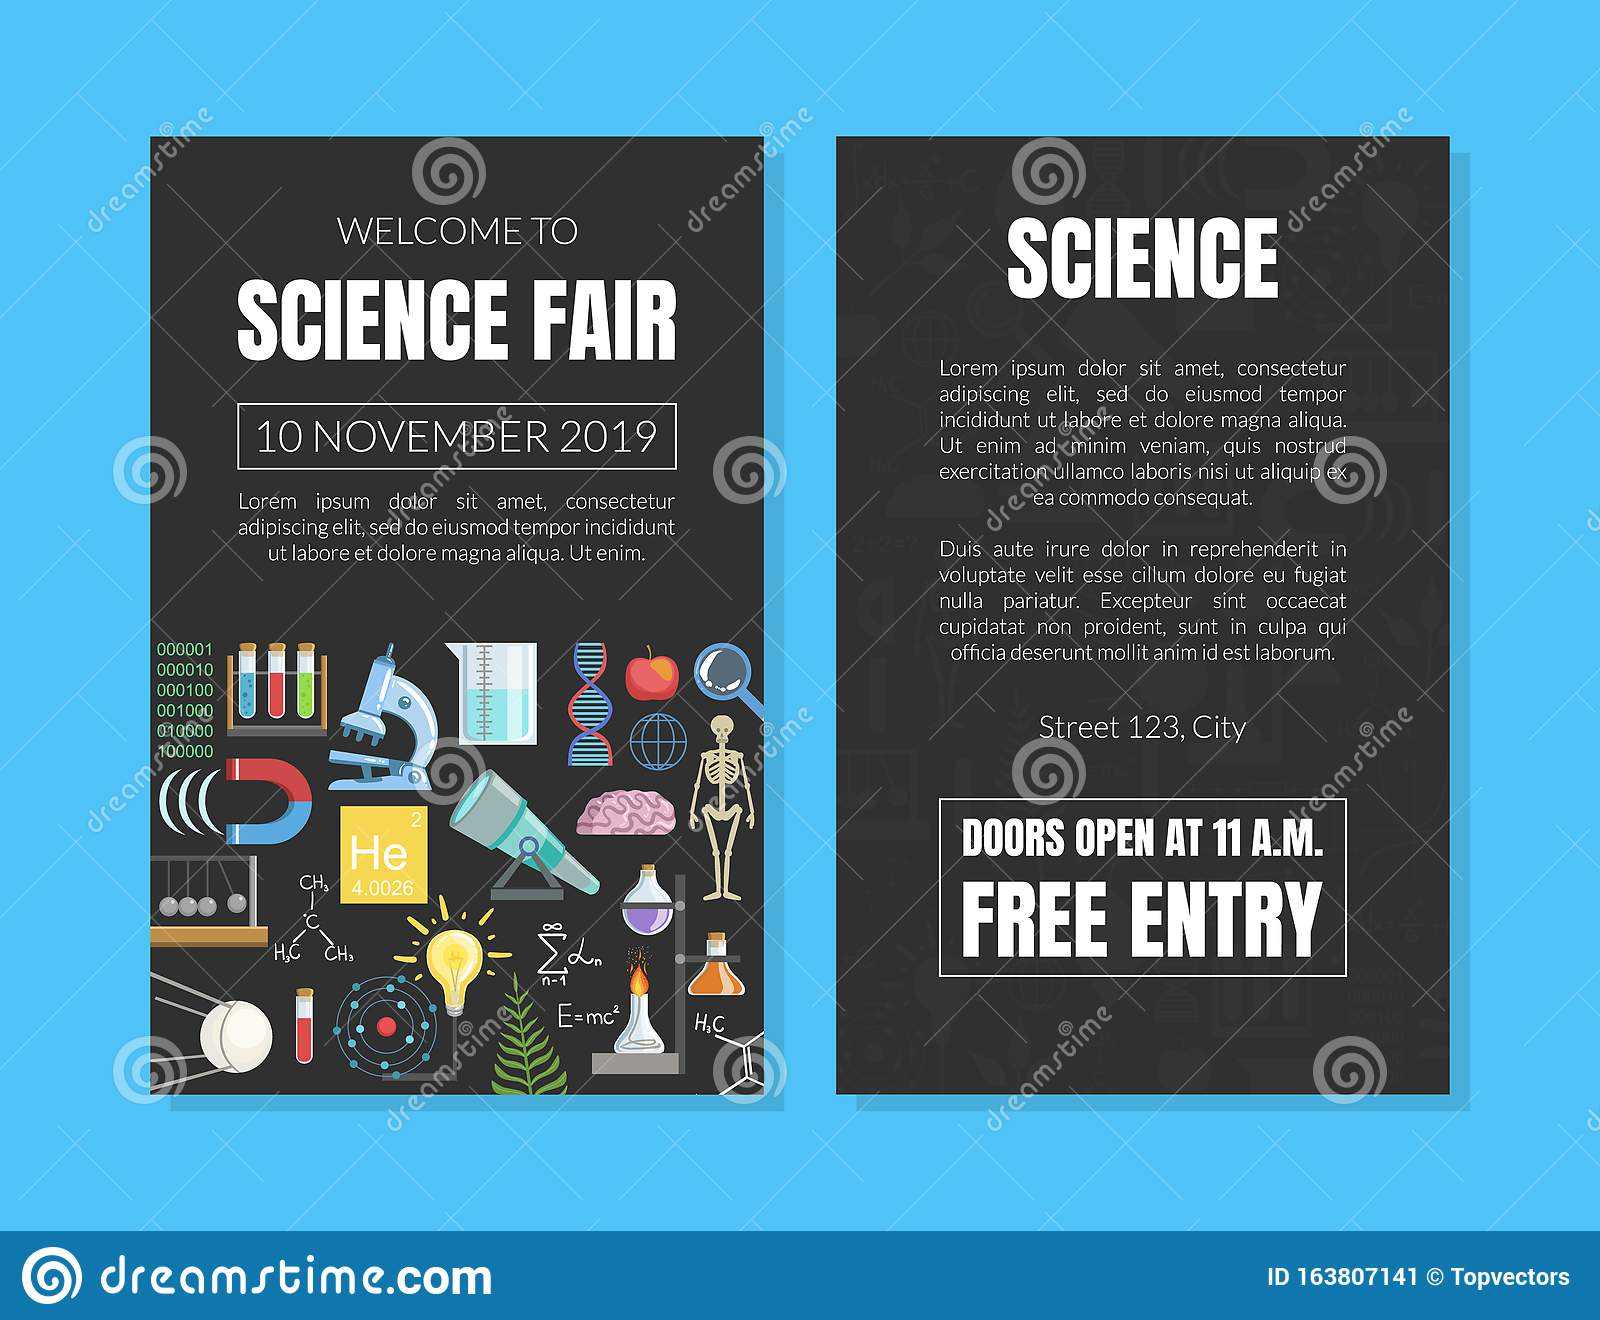 Welcome To Science Fair Invitation Card Template, Scientific With Regard To Science Fair Banner Template